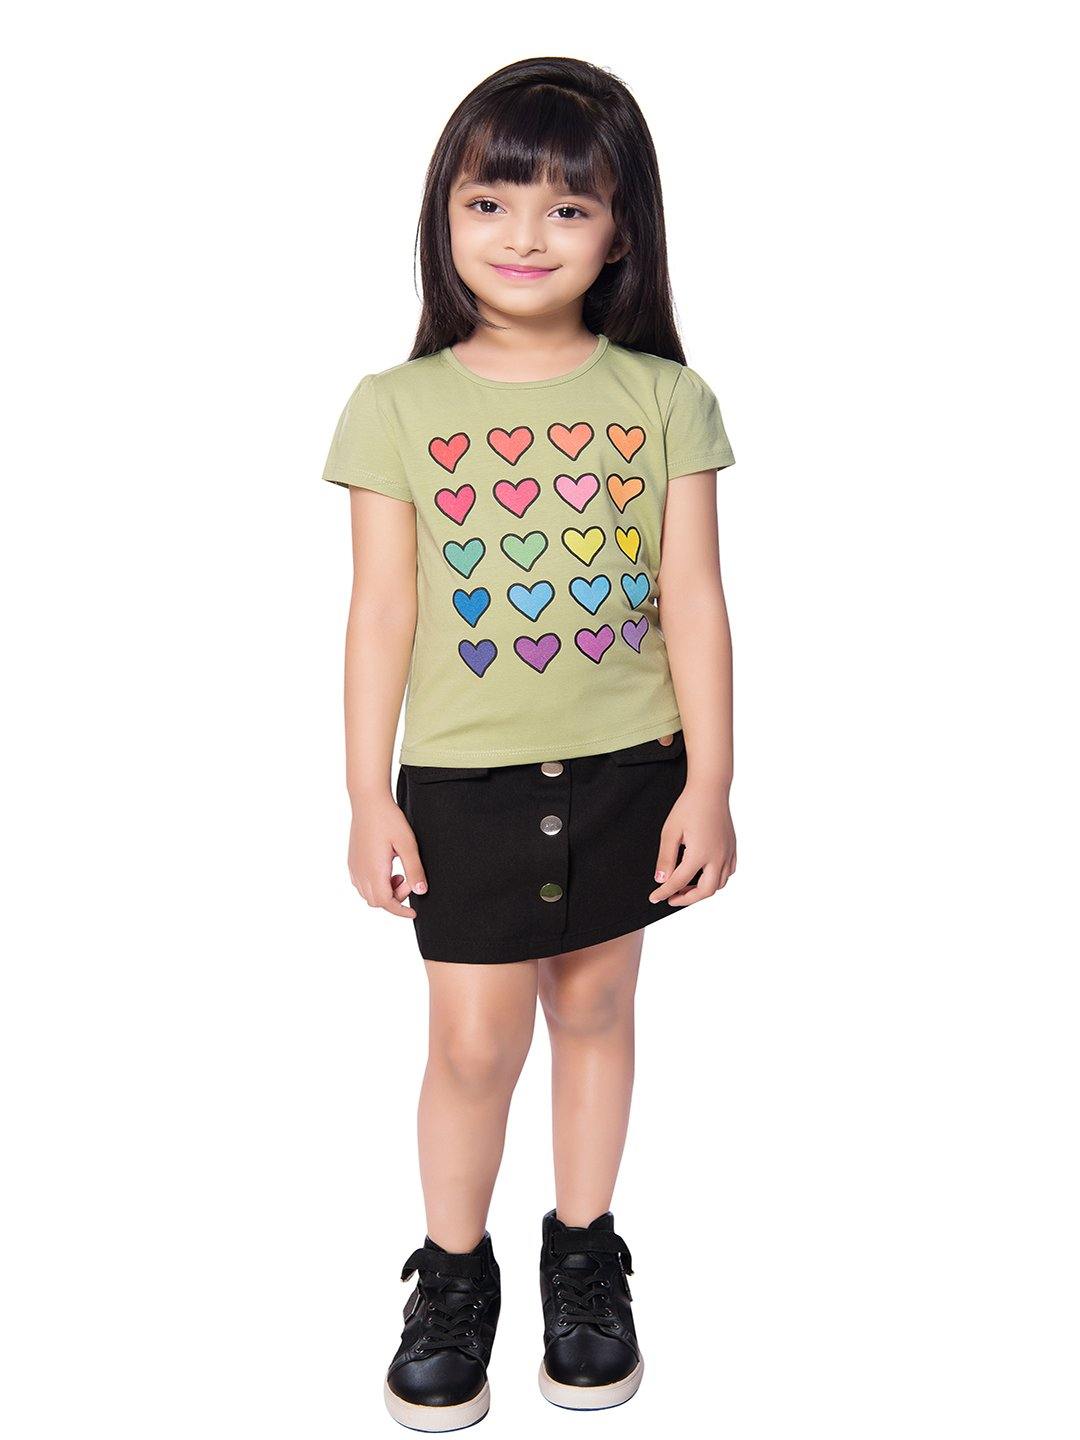 Tiny Baby Green Colored Top - T-107 Green - TINY BABY INDIA shop.tinybaby.in